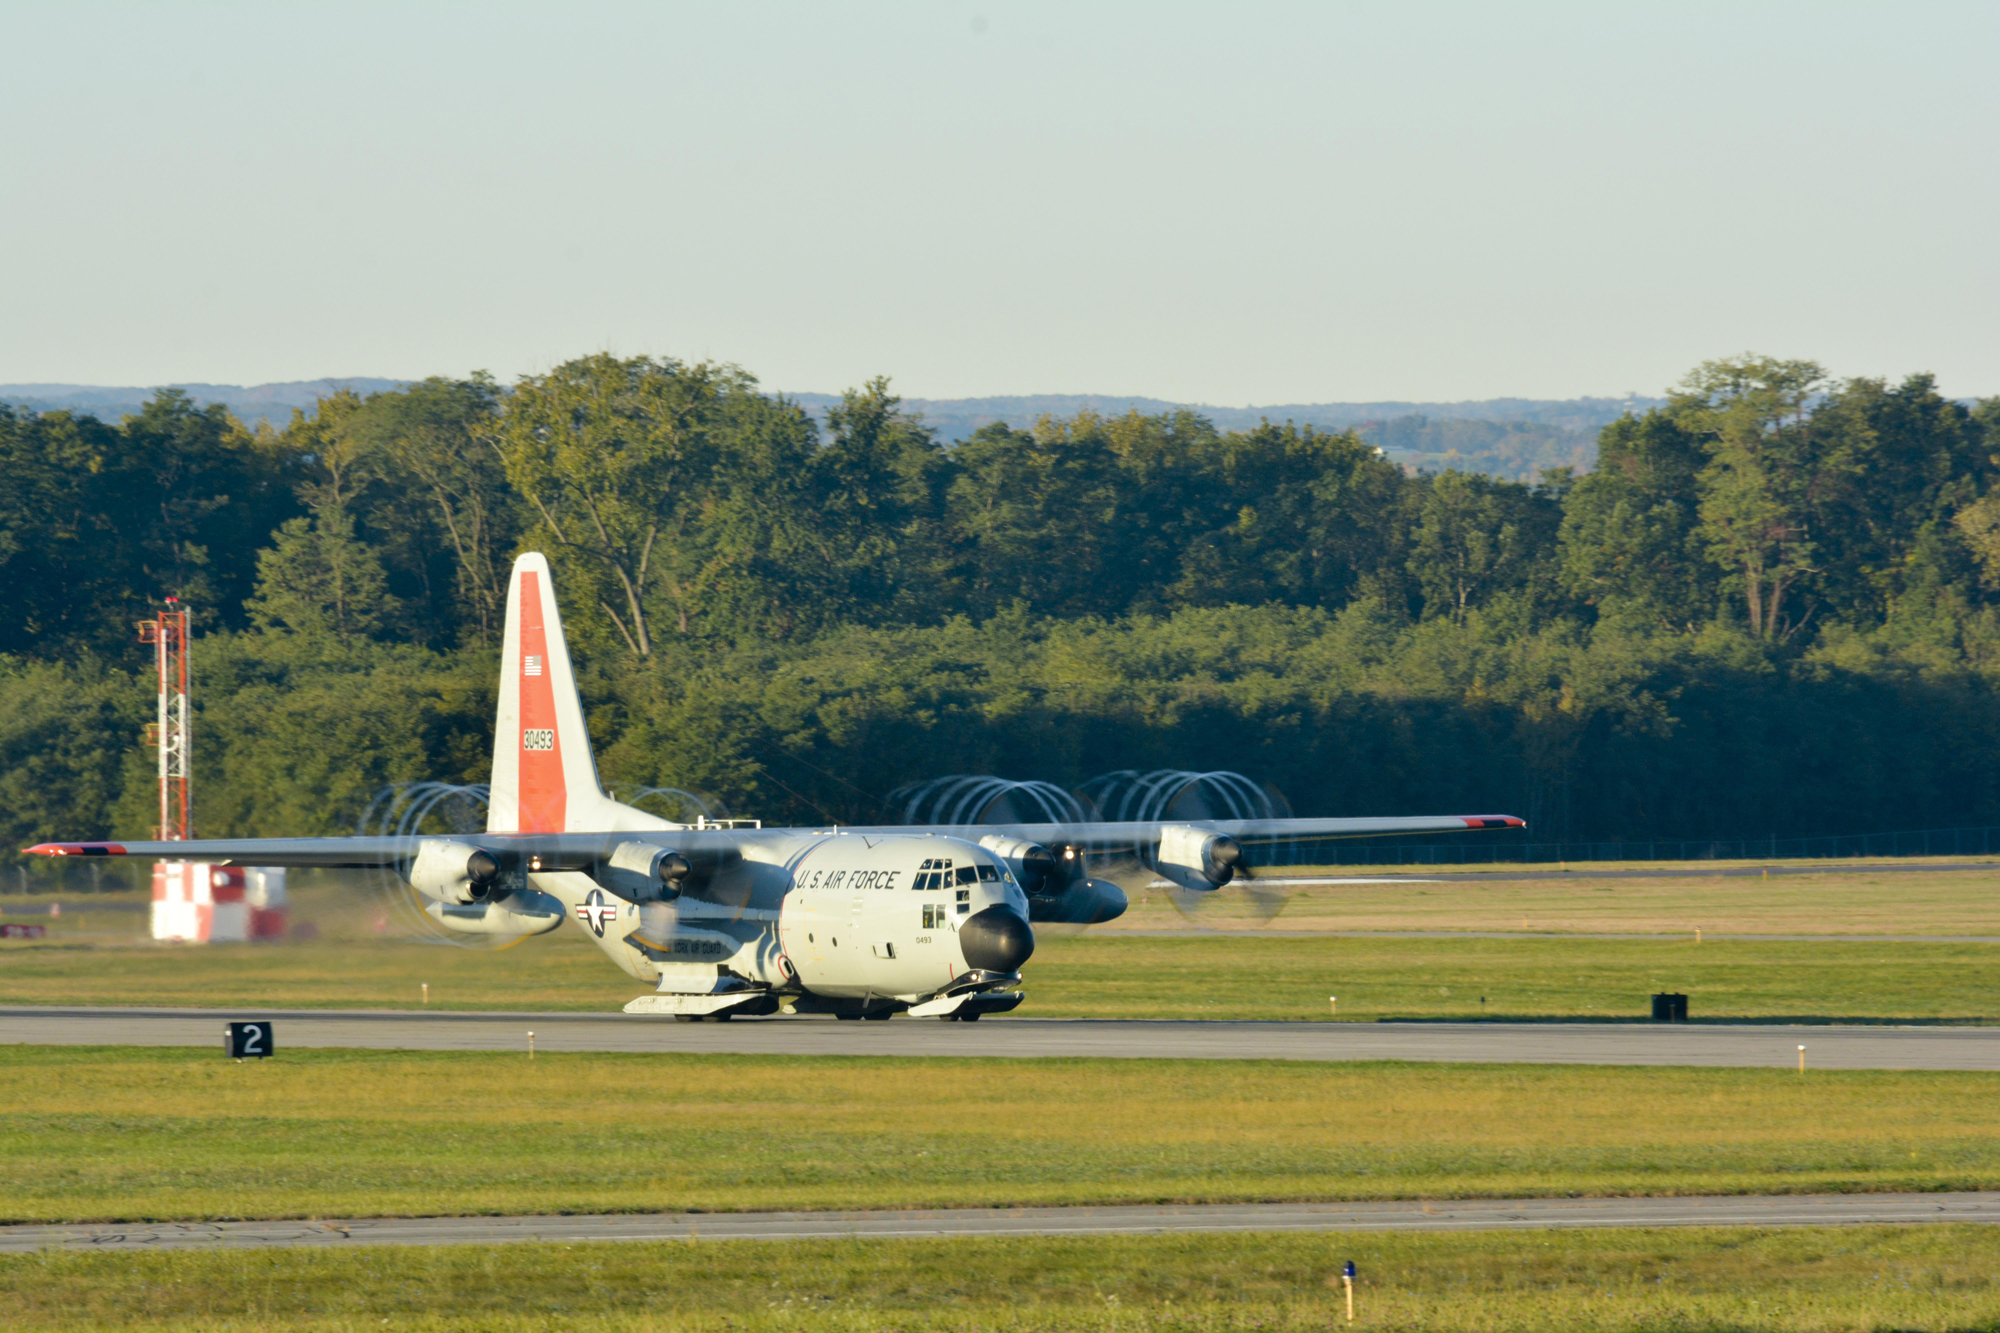 An LC-130 Skibird takes off from Stratton Air National Guard Base, Scotia, N.Y., to begin the journey to McMurdo Station, Antarctica